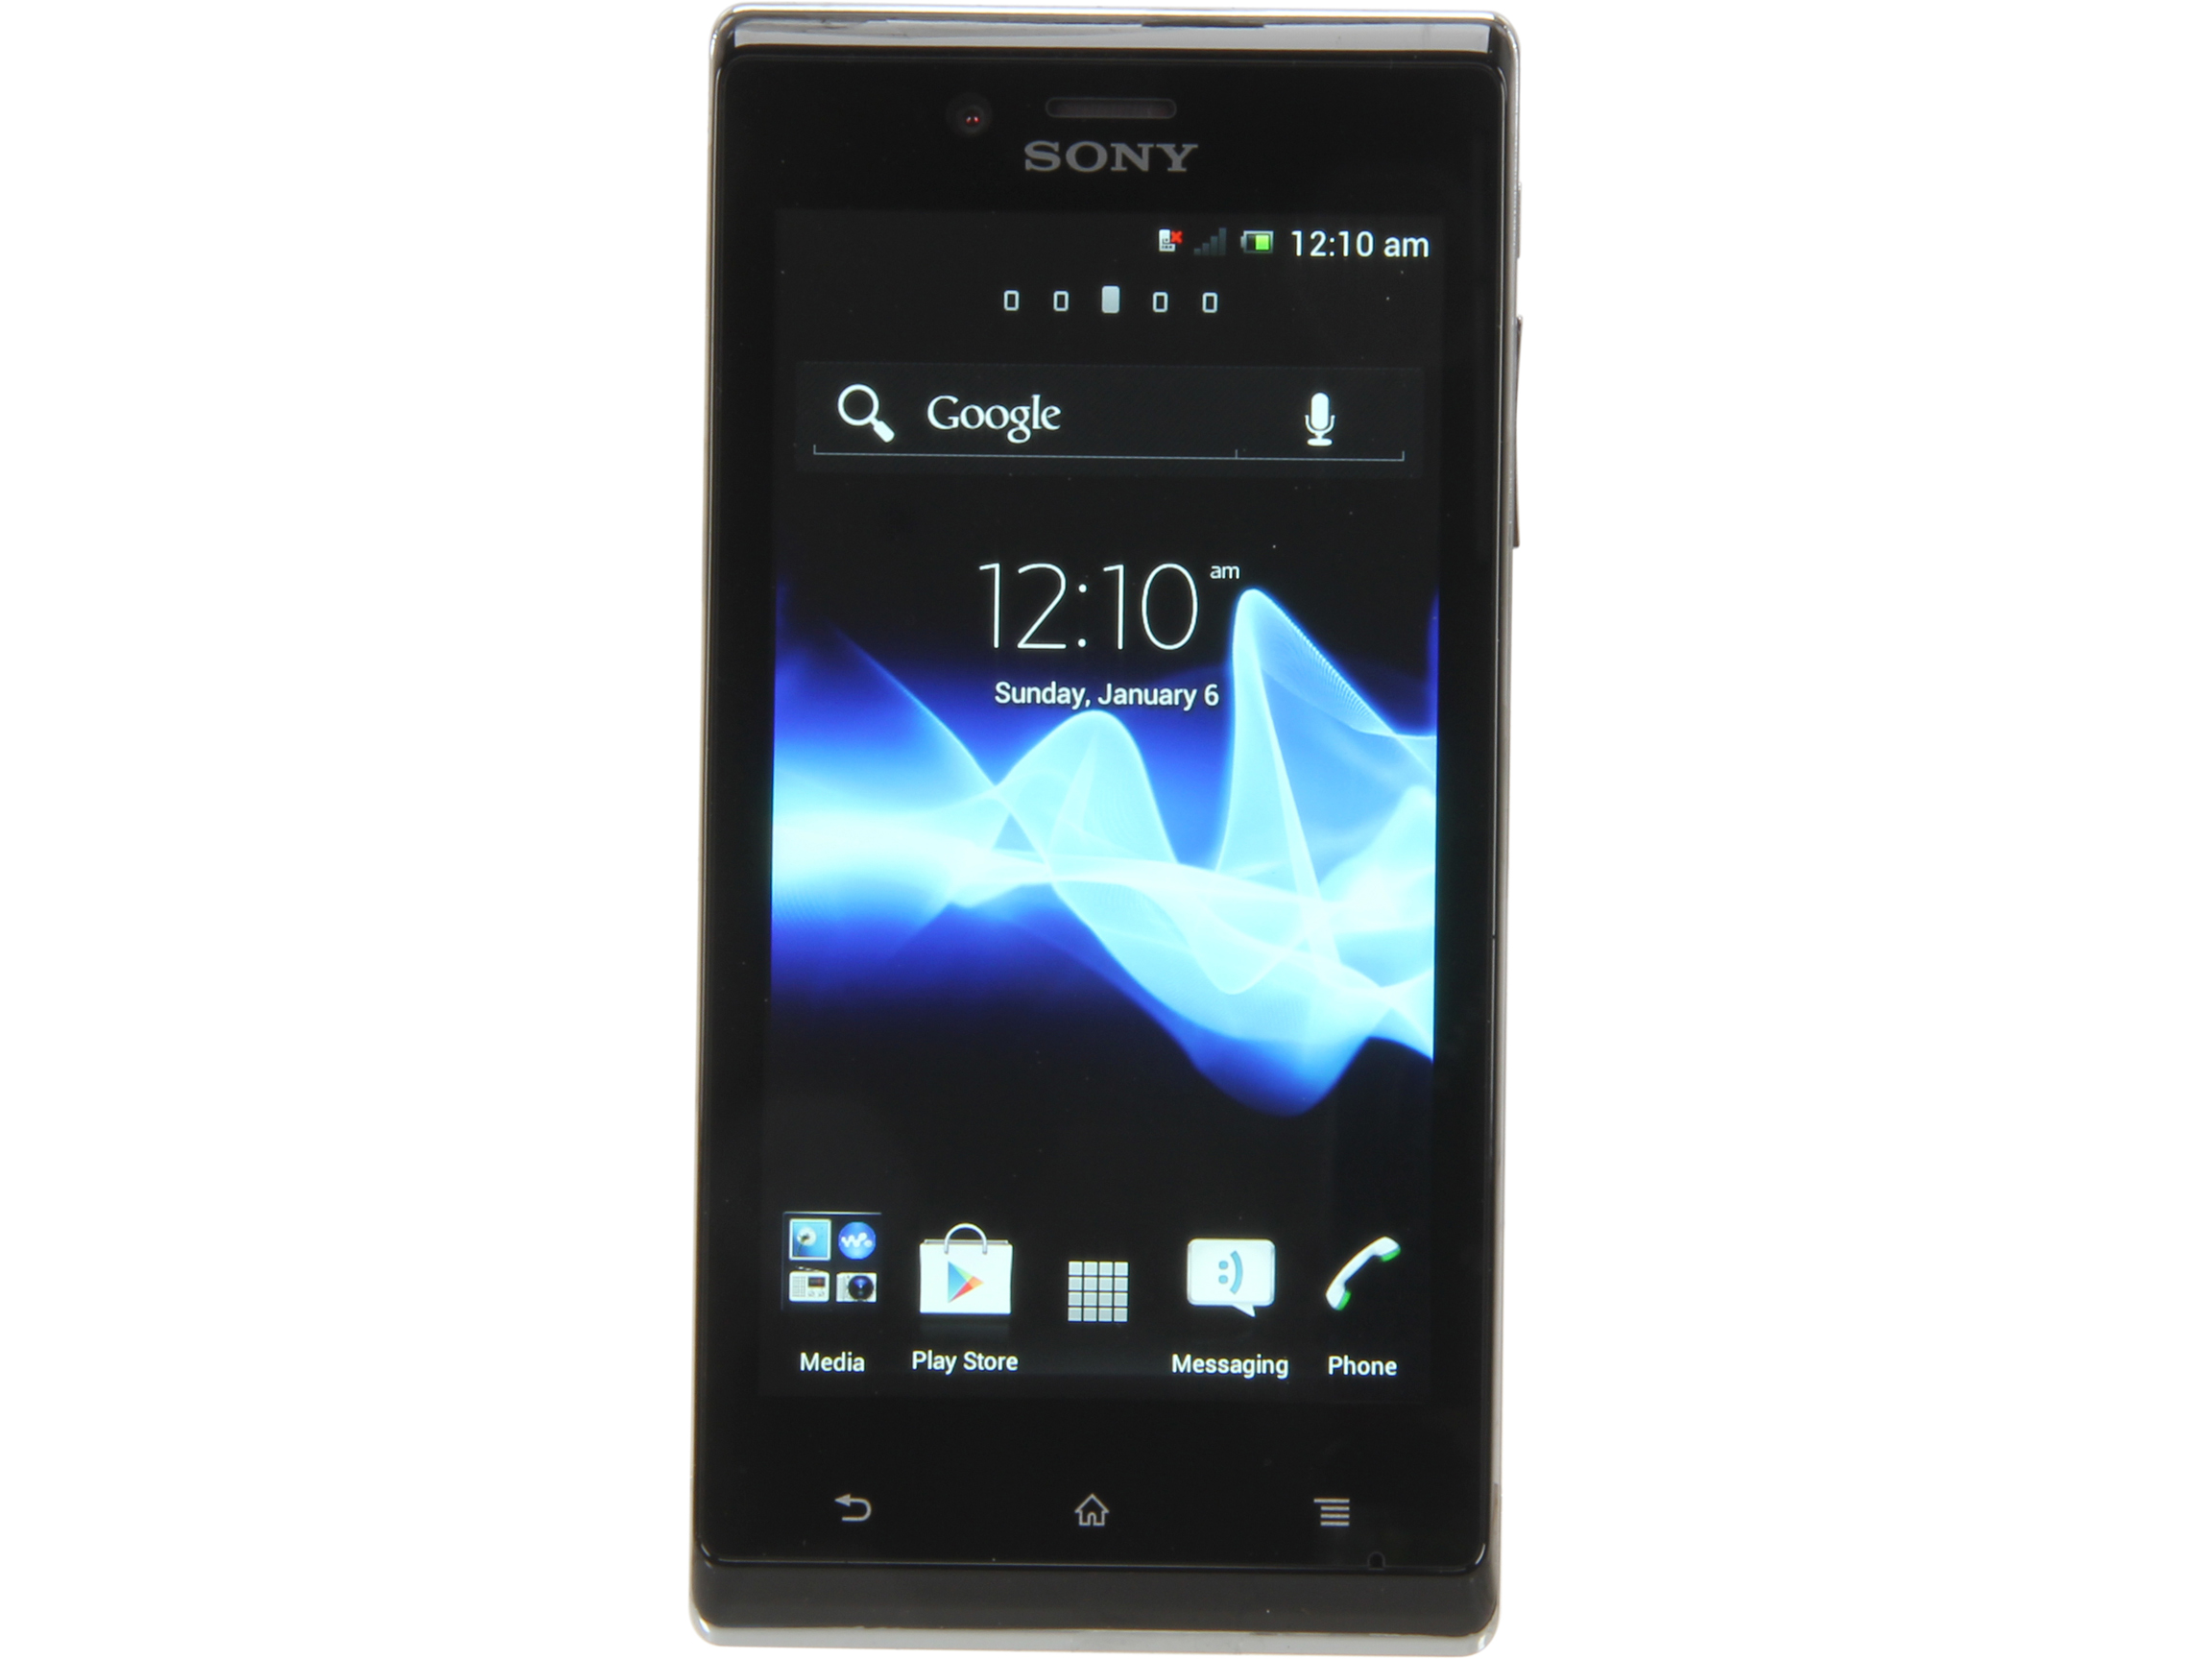 Sony Xperia J ST26a 4 GB (2 GB user available), 512 MB RAM Gold Unlocked Cell Phone 4.0"